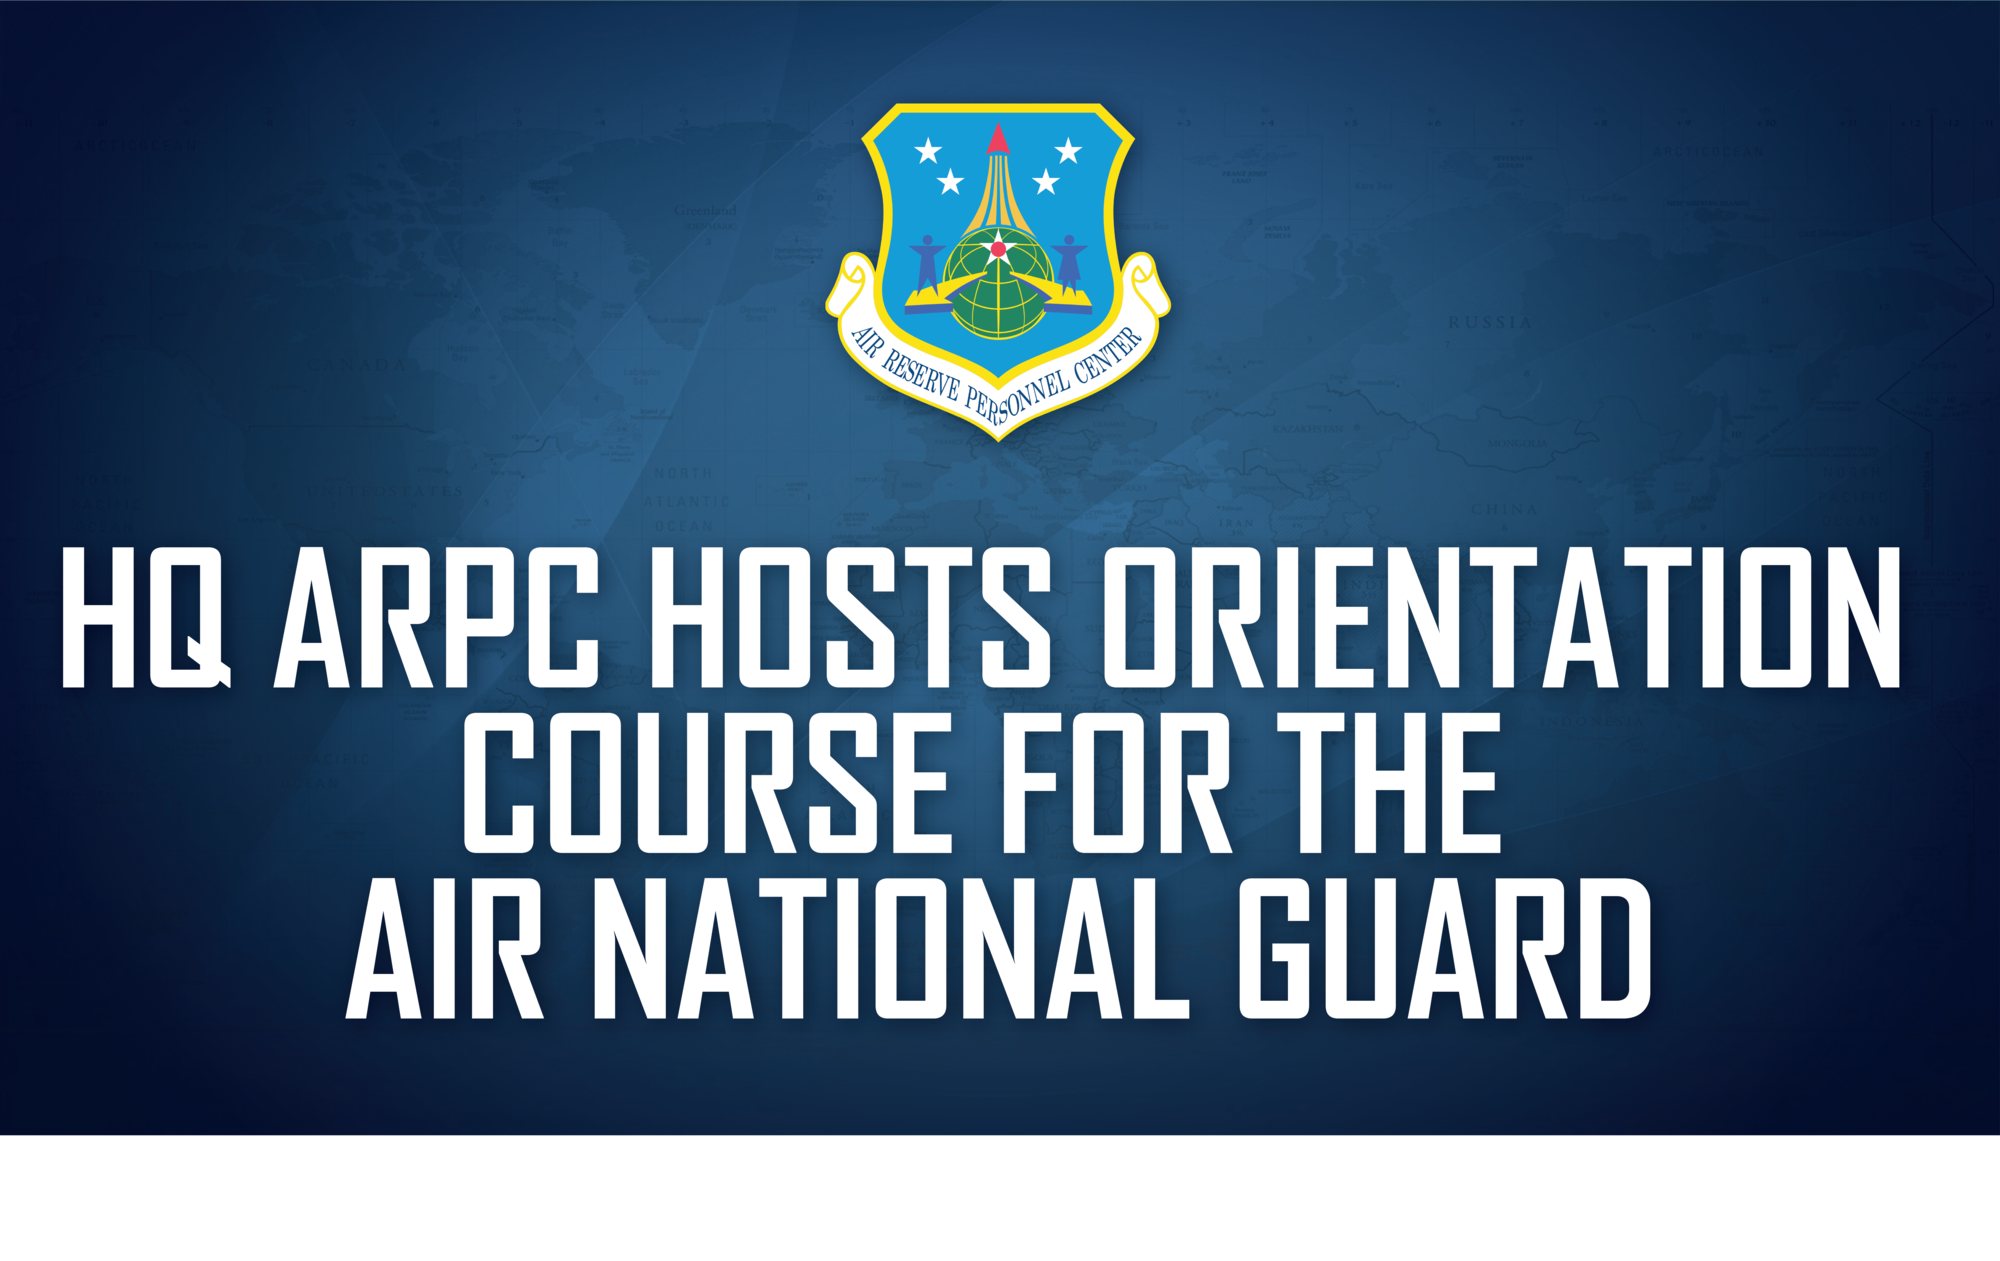 HQ ARPC hosts orientation course for the Air National Guard